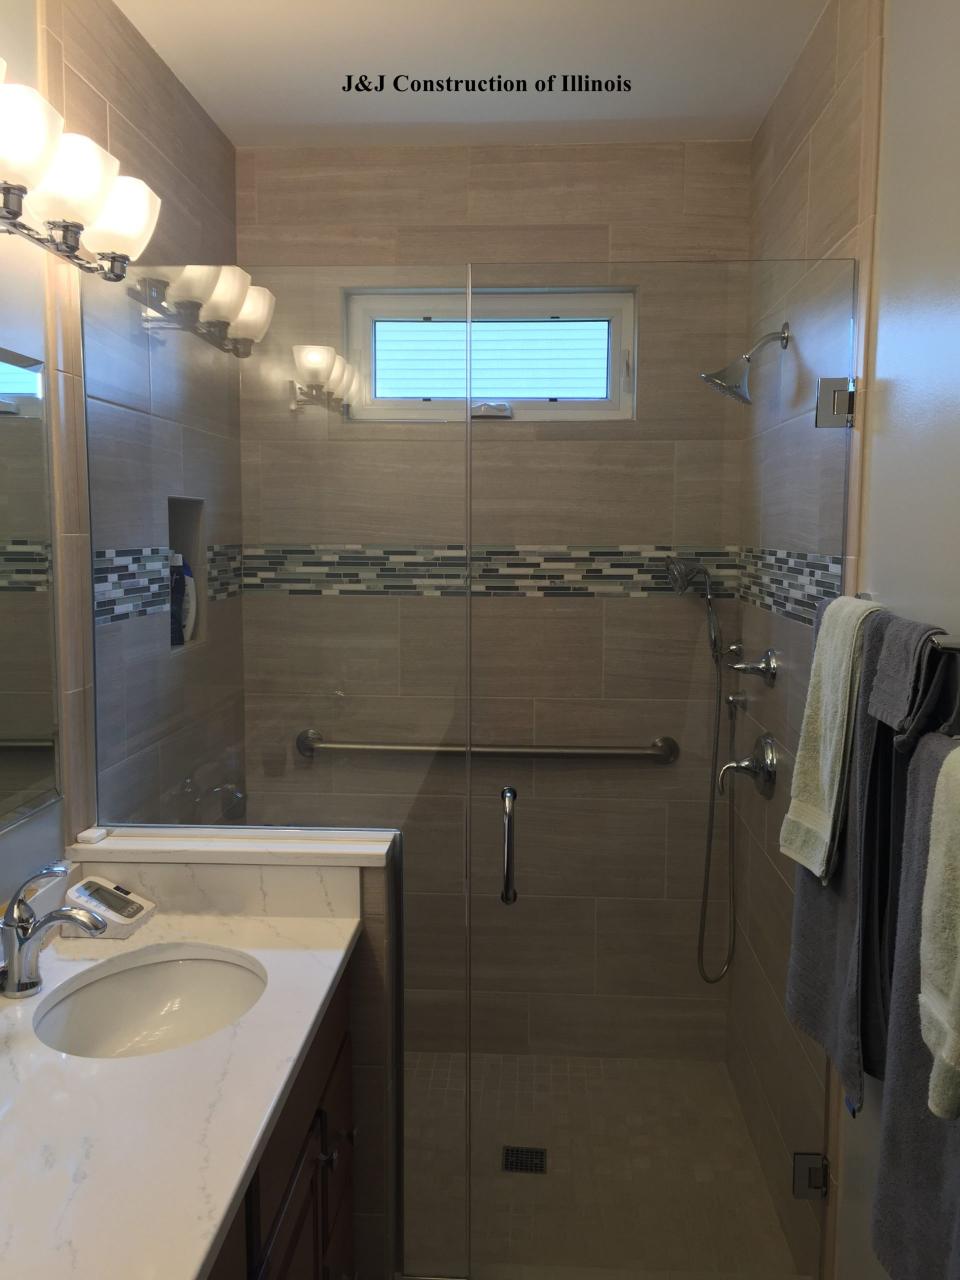 A Naperville Bathroom Remodel that Took Just 7 Days!